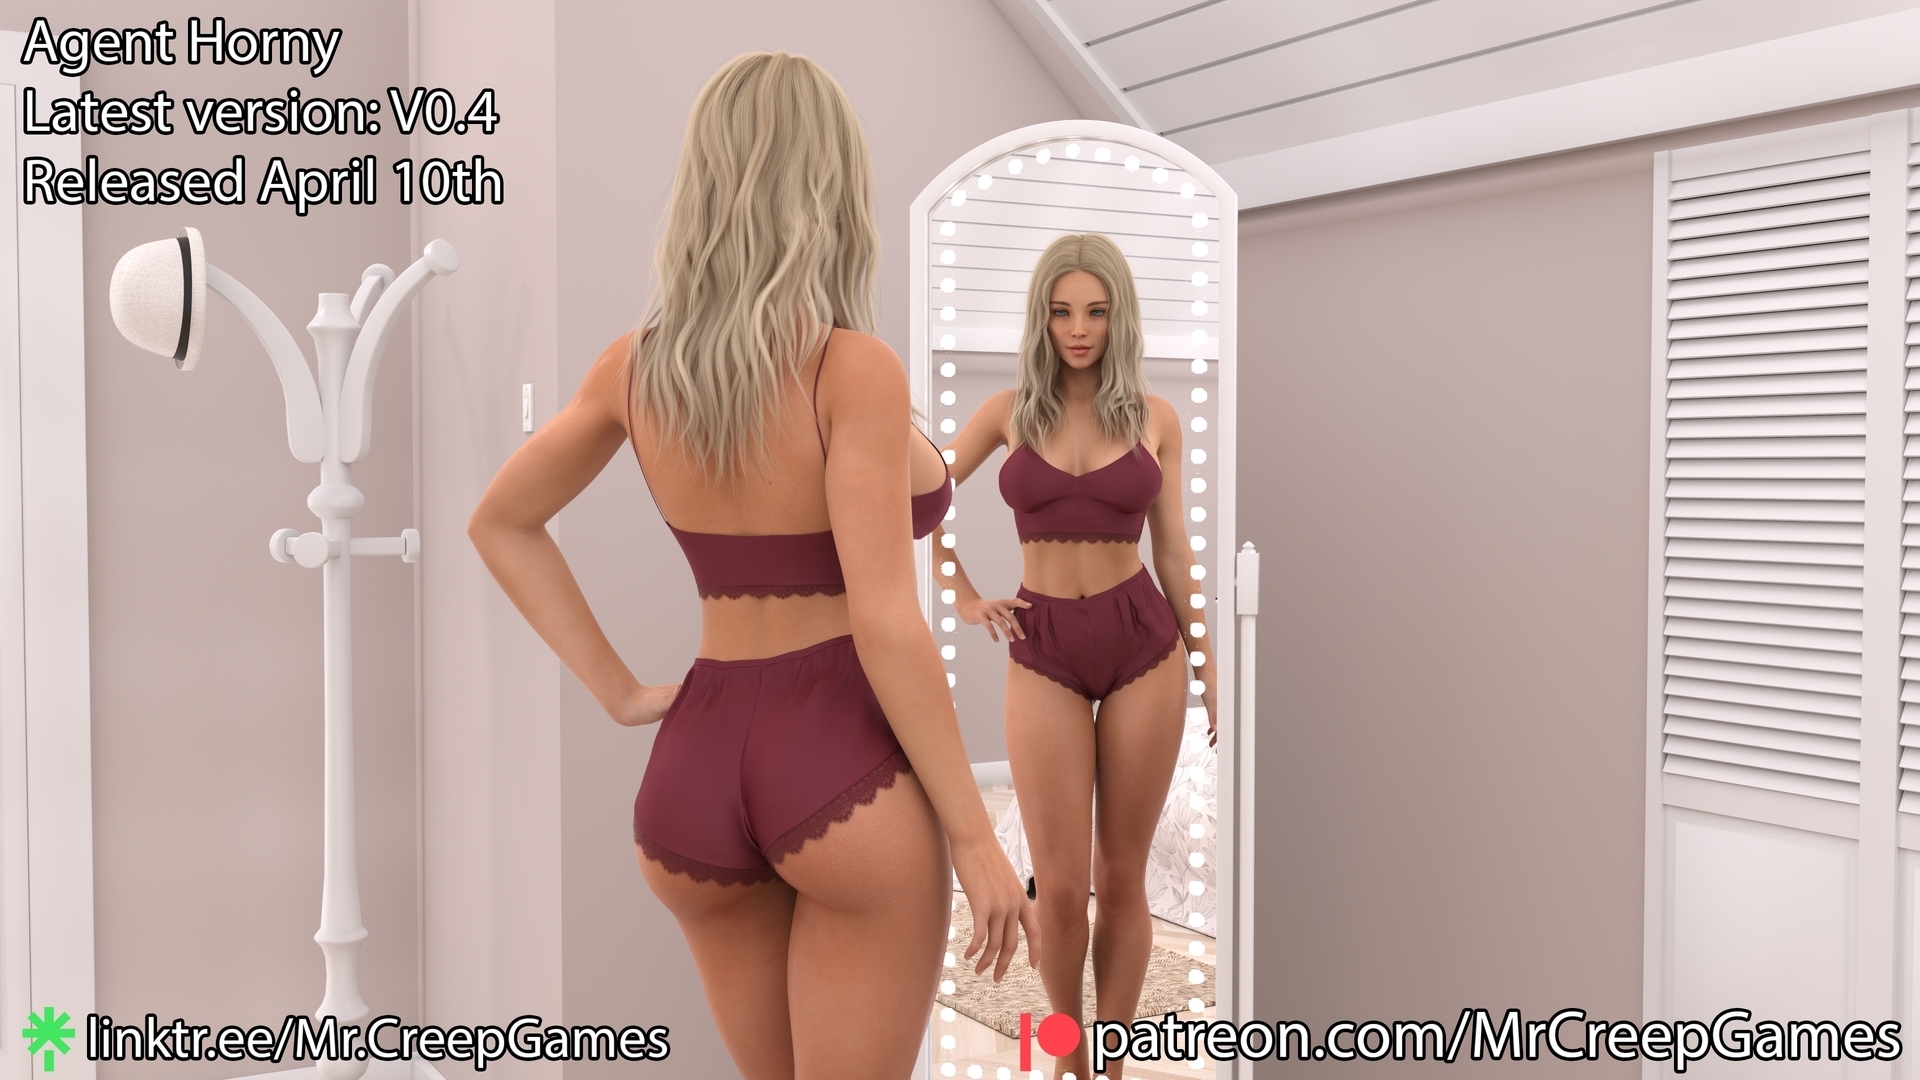 Agent Horny V0.4 Released  3d Porn 3d Girl Nsfw 3dnsfw Sexy Hot Nude Big boobs Pinup Pose Cute Teen